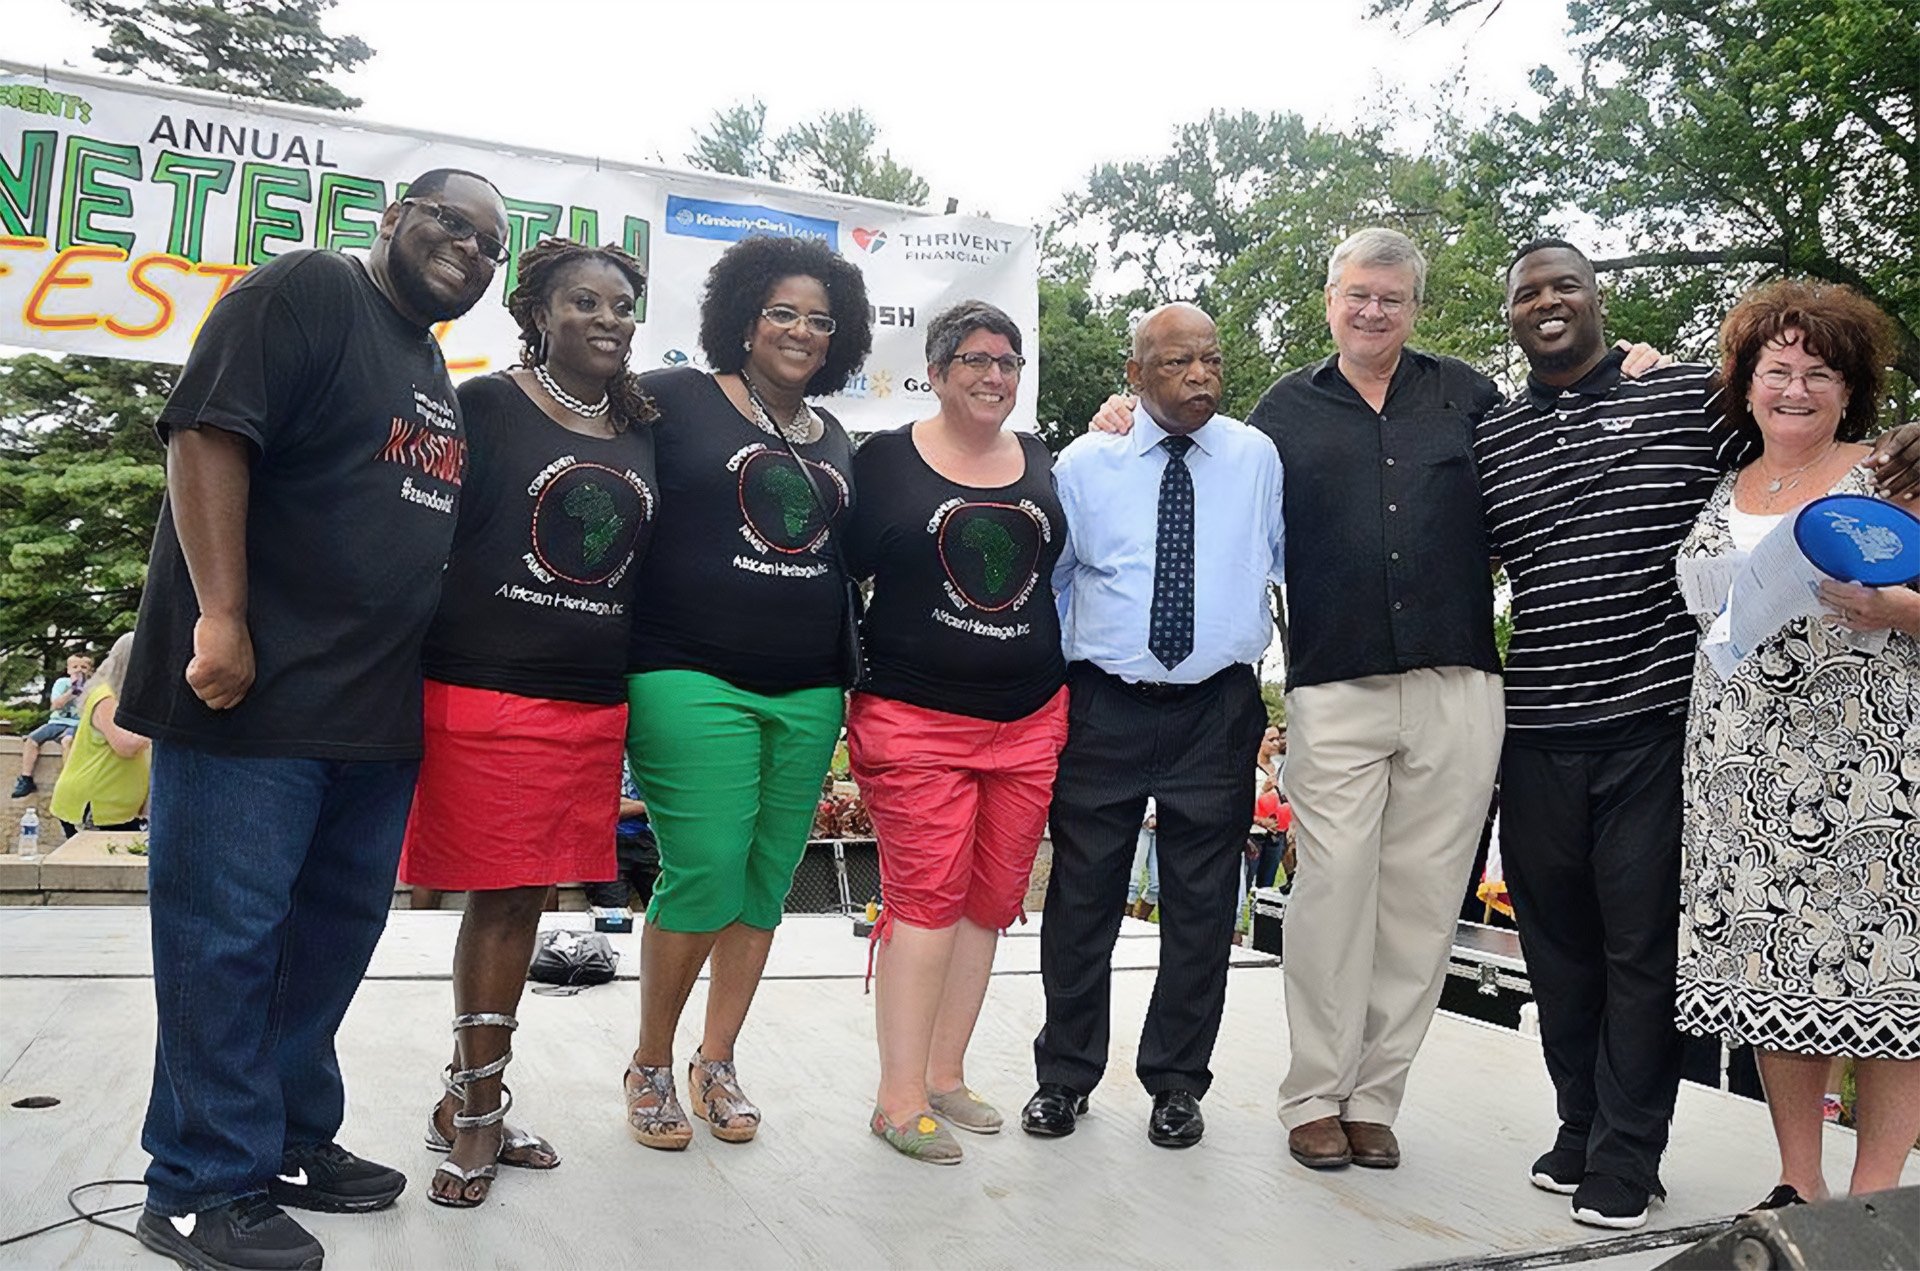 Organized by African Heritage Inc., Appleton's contemporary Juneteenth Festival began in 2010. It has grown to an annual attendance of thousands. Congressman John Lewis was featured speaker at the 2018 event.